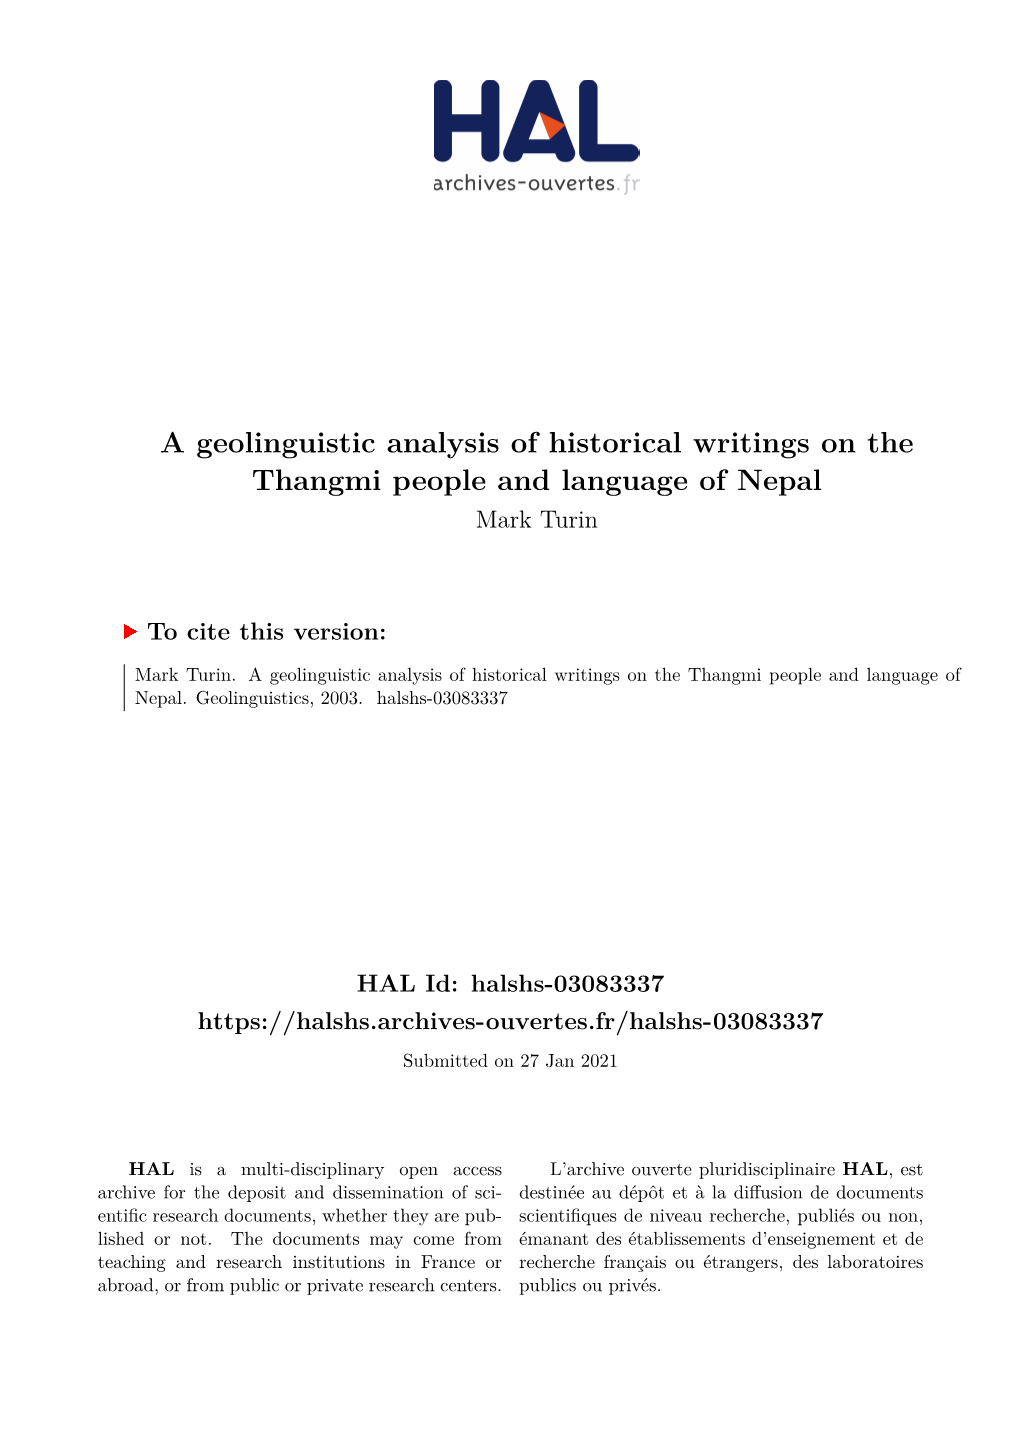 A Geolinguistic Analysis of Historical Writings on the Thangmi People and Language of Nepal Mark Turin